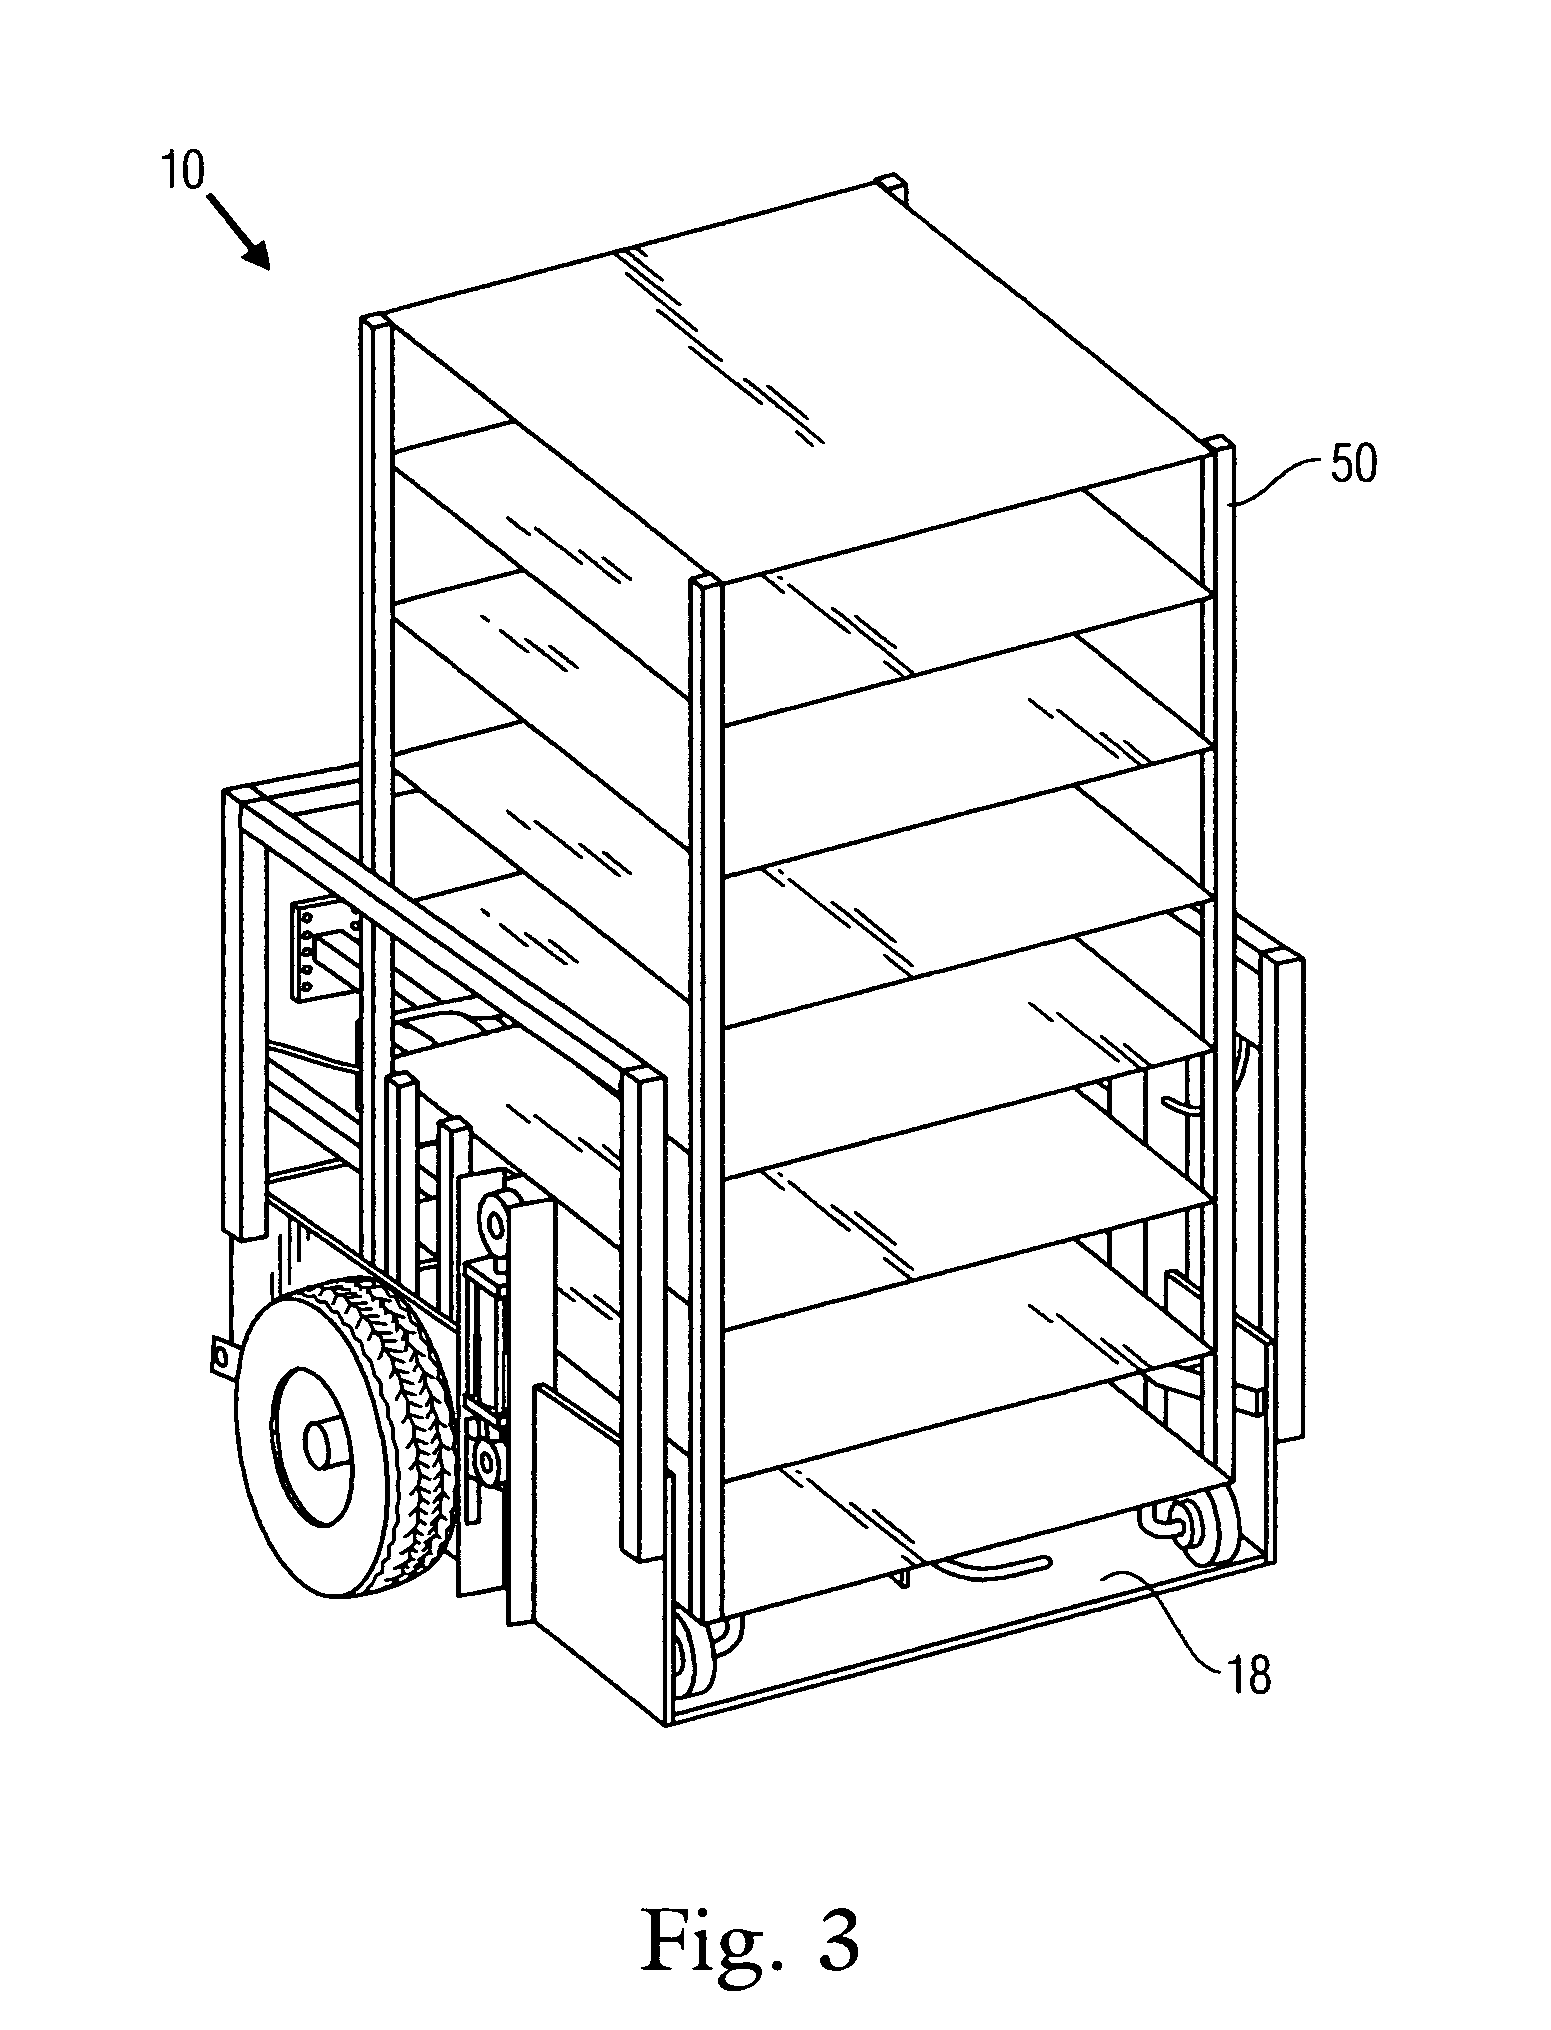 Apparatus and method for efficiently loading and unloading racks of potted plants in a wholesale nursery where the plants are growing